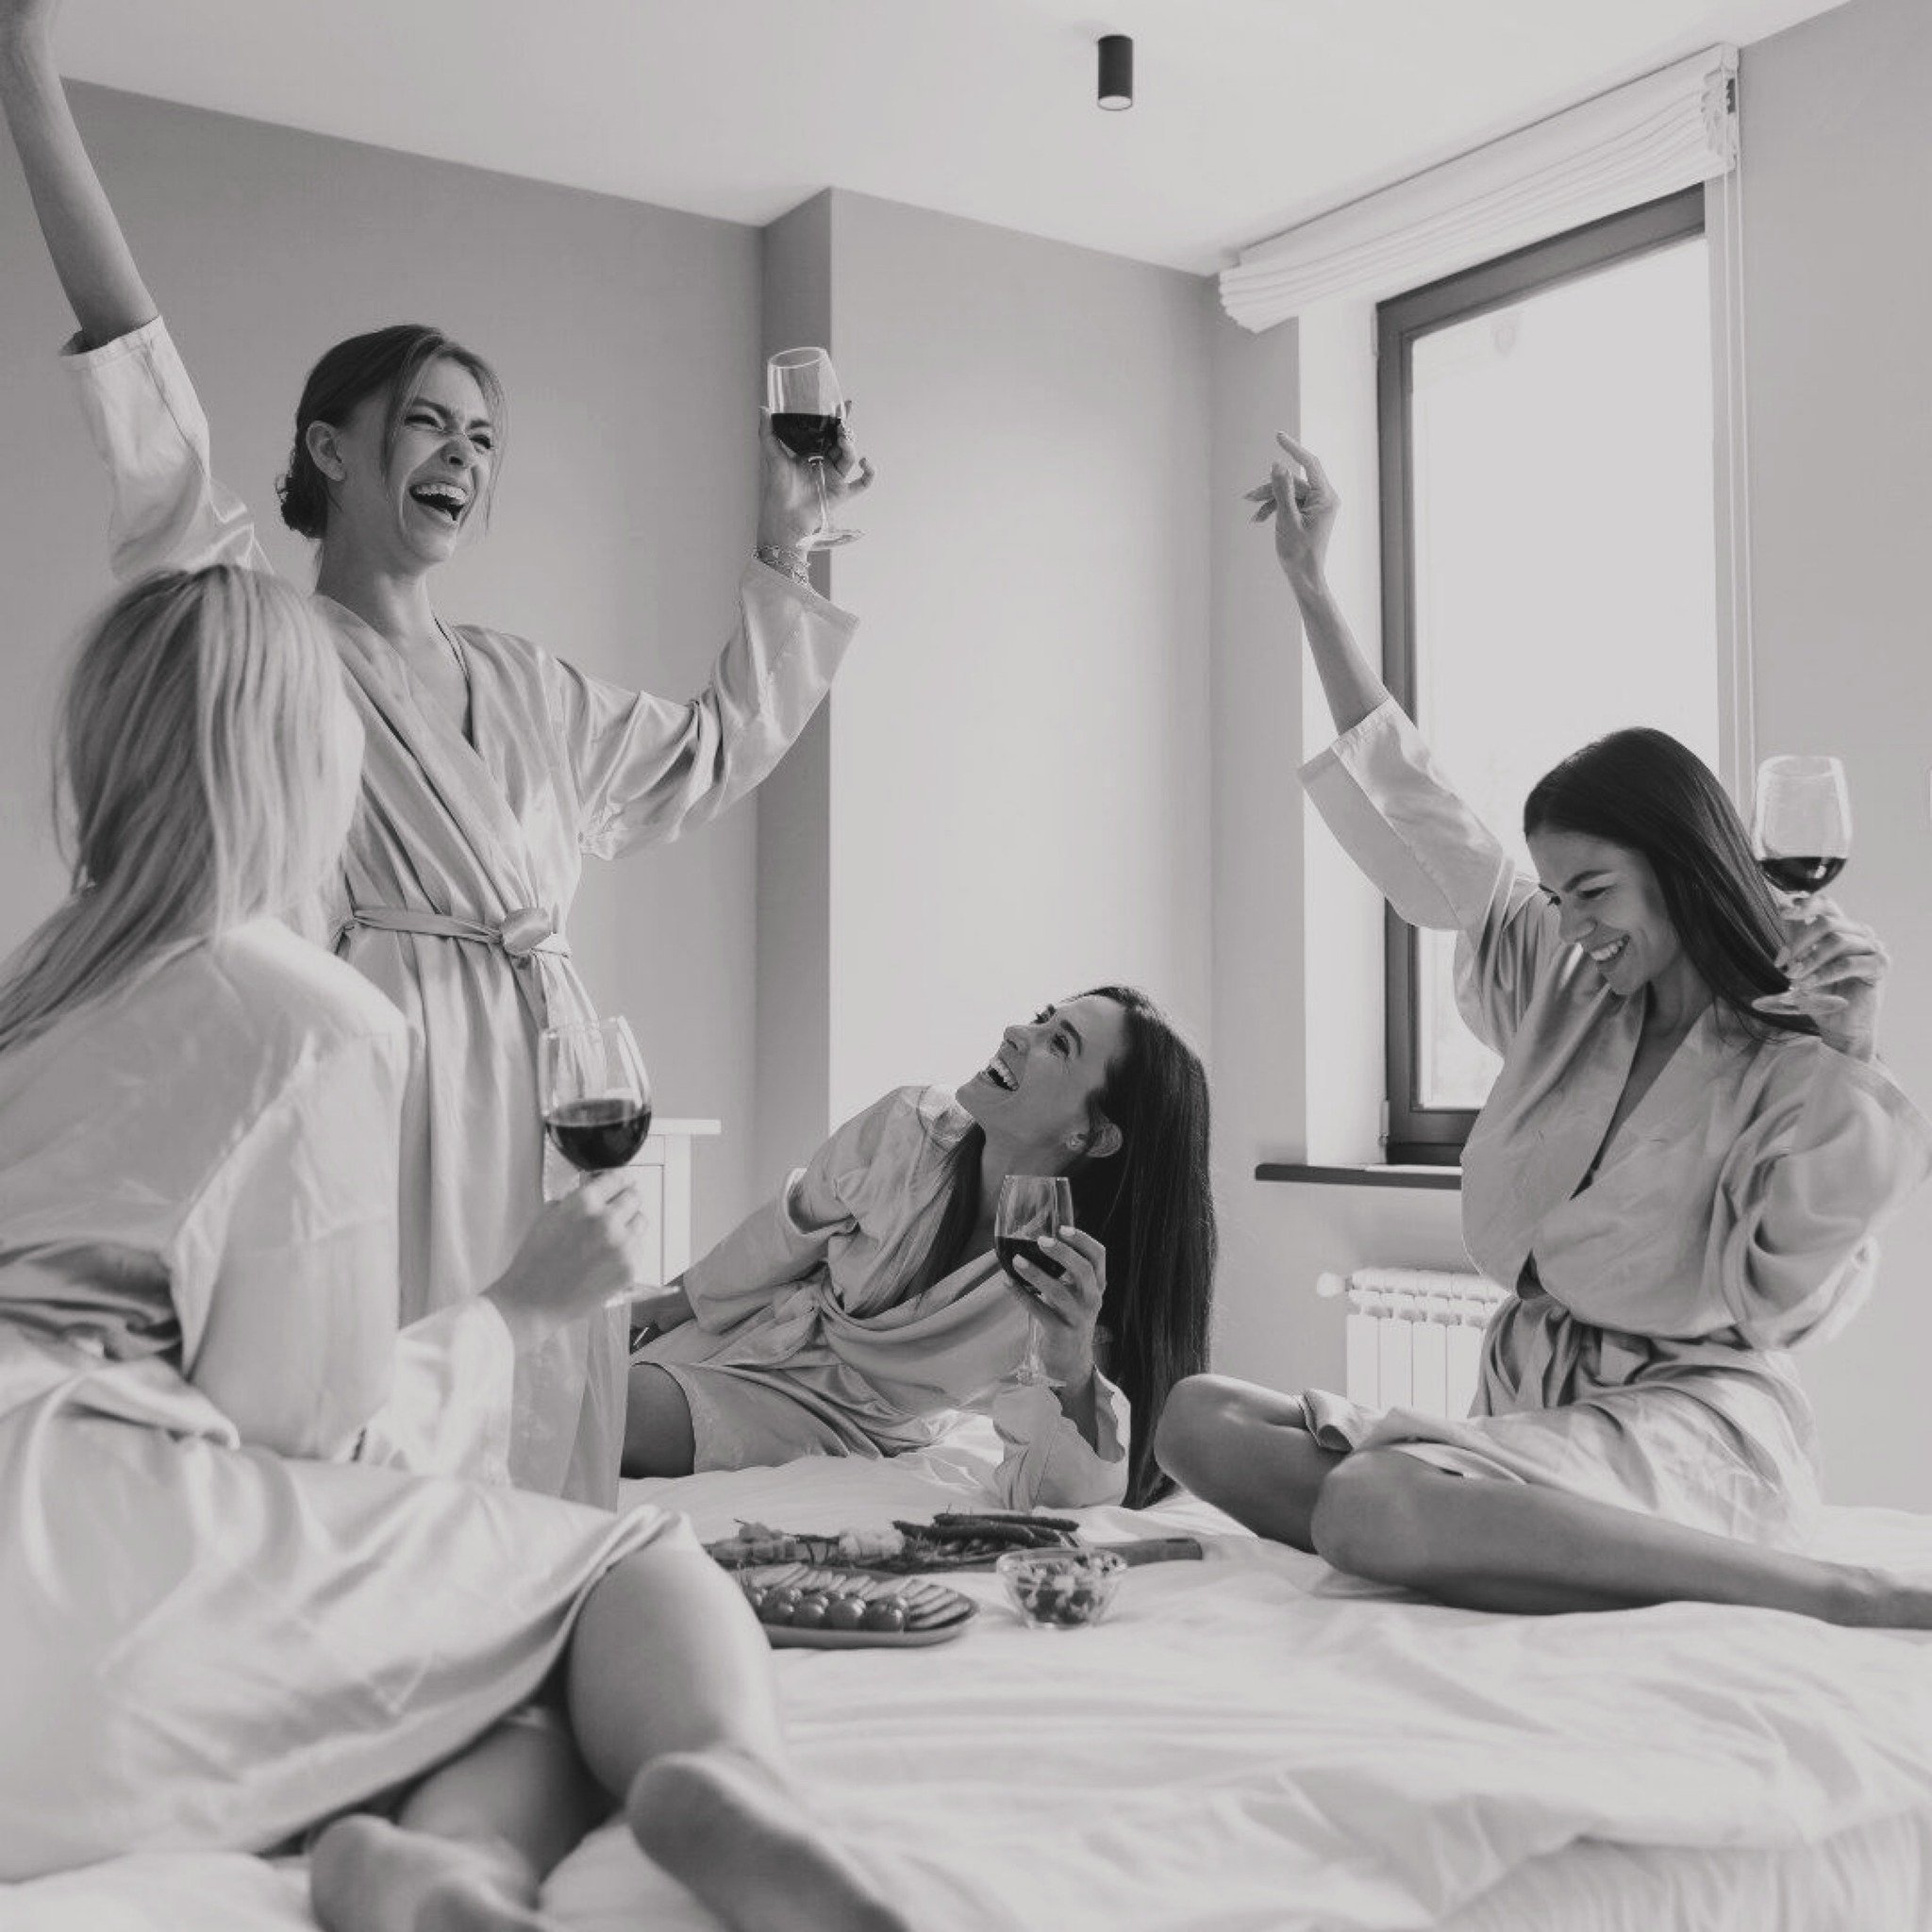 The final countdown to &lsquo;I do&rsquo;. The night before is one of the most special moments for a bride and her best girls. 
What will you be doing the night before your big day? 
Pyjamas by @thesleepovernz 
Repost @thesleepovernz 
.
.
.
.
.
.
.
#